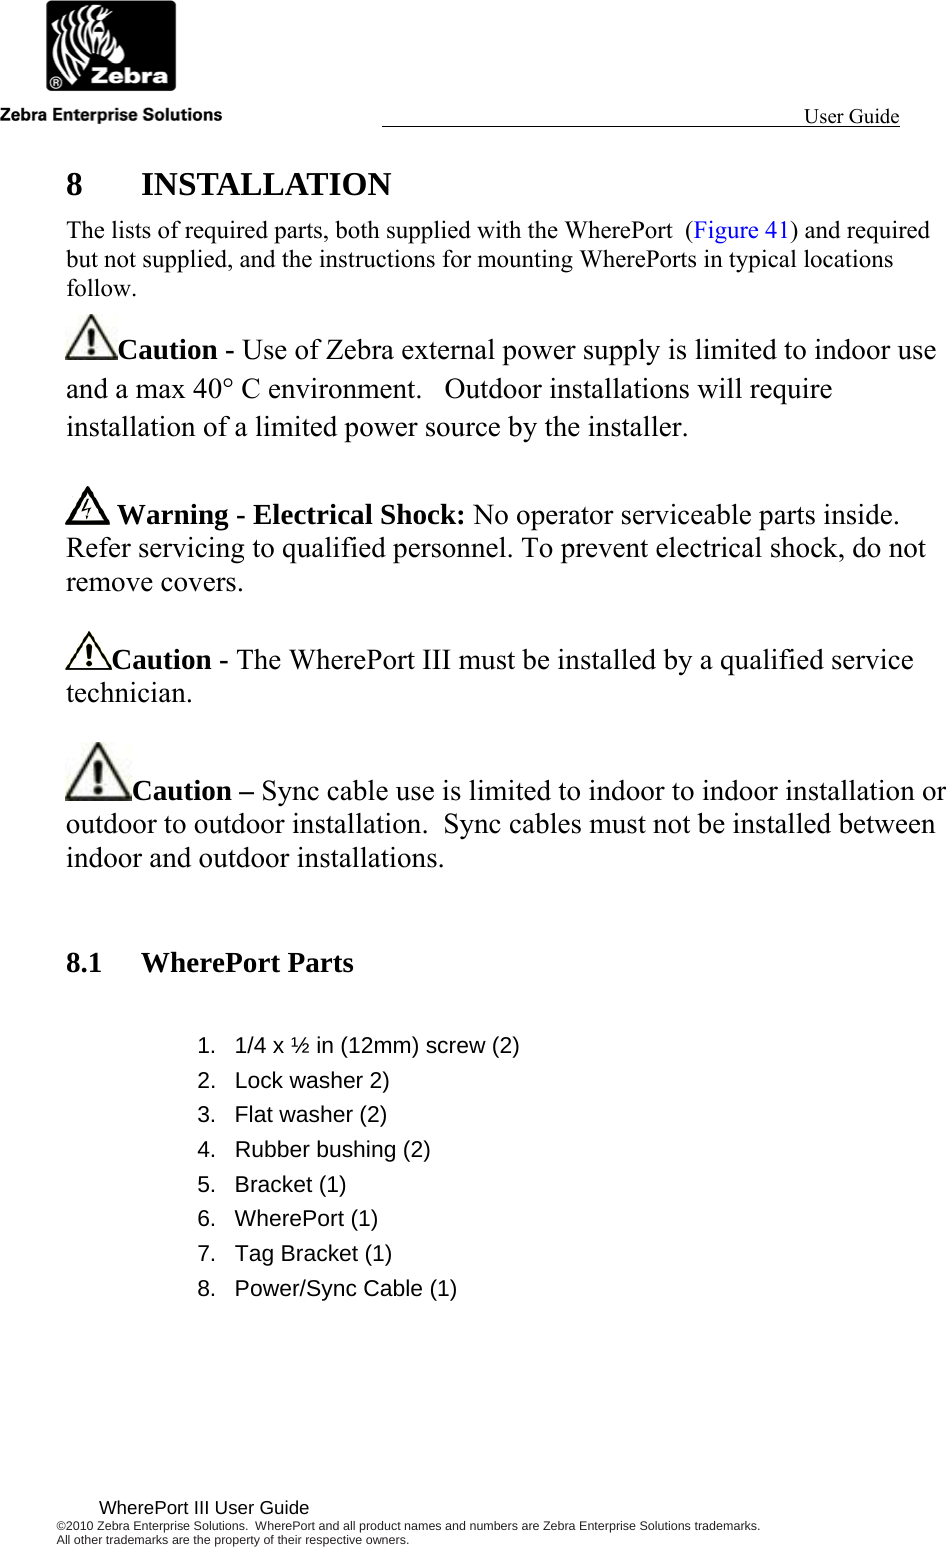                                                                                                                 User Guide                                        WherePort III User Guide ©2010 Zebra Enterprise Solutions.  WherePort and all product names and numbers are Zebra Enterprise Solutions trademarks.  All other trademarks are the property of their respective owners.  8 INSTALLATION The lists of required parts, both supplied with the WherePort  (Figure 41) and required but not supplied, and the instructions for mounting WherePorts in typical locations follow. Caution - Use of Zebra external power supply is limited to indoor use and a max 40° C environment.   Outdoor installations will require installation of a limited power source by the installer.   Warning - Electrical Shock: No operator serviceable parts inside. Refer servicing to qualified personnel. To prevent electrical shock, do not remove covers.  Caution - The WherePort III must be installed by a qualified service technician.  Caution – Sync cable use is limited to indoor to indoor installation or outdoor to outdoor installation.  Sync cables must not be installed between indoor and outdoor installations.  8.1 WherePort Parts  1.  1/4 x ½ in (12mm) screw (2) 2.  Lock washer 2) 3.  Flat washer (2)  4.  Rubber bushing (2)  5. Bracket (1) 6. WherePort (1) 7.  Tag Bracket (1) 8.  Power/Sync Cable (1) 